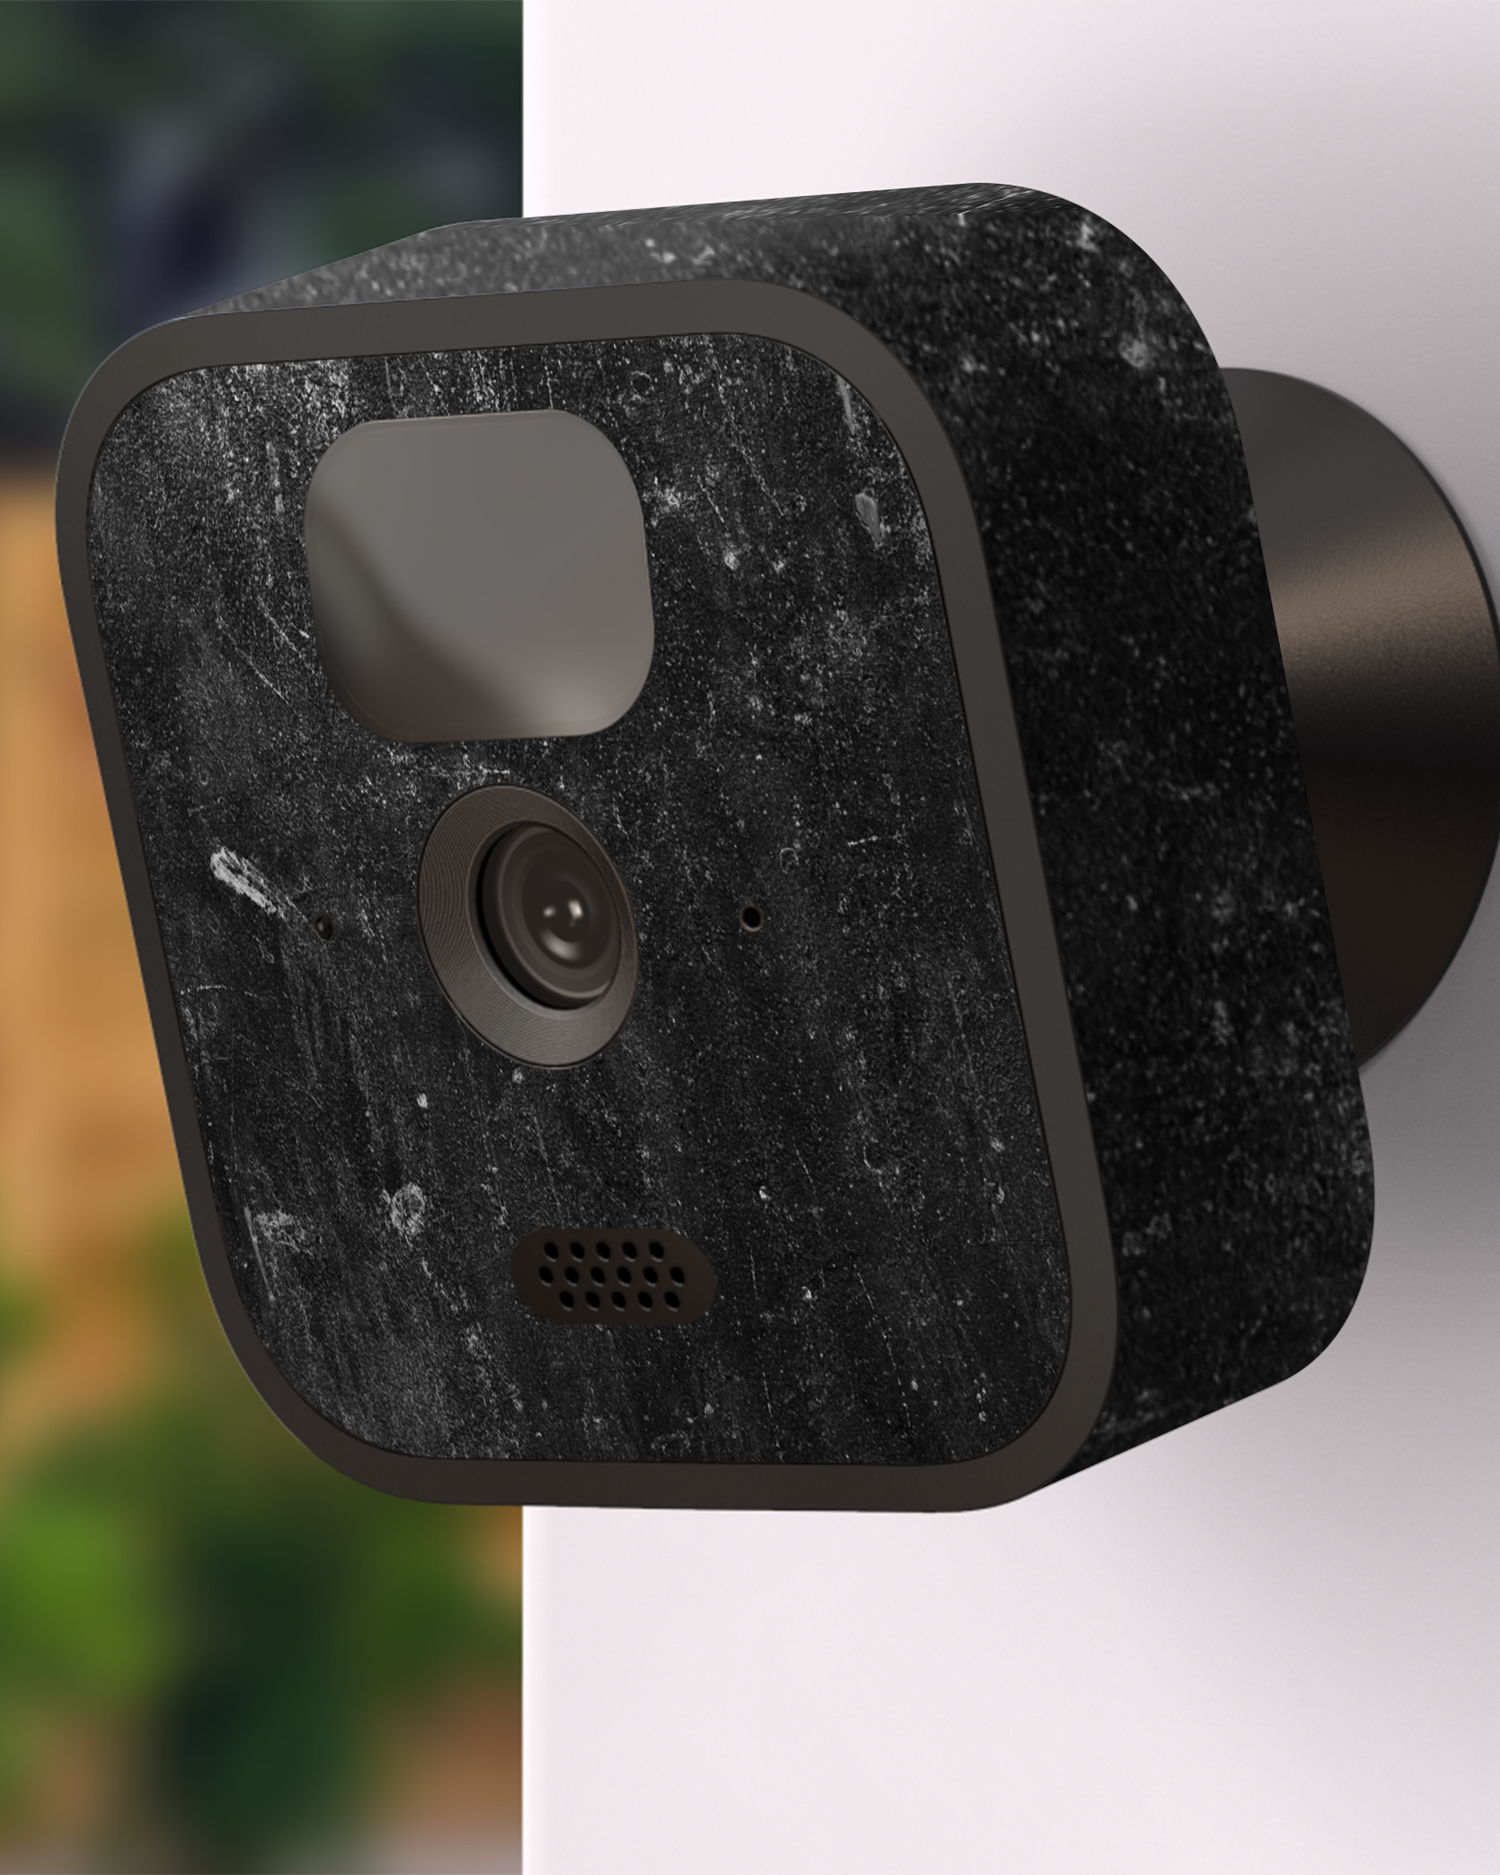 Grundge Camera Skin Blink Outdoor (2020) attached to exterior wall